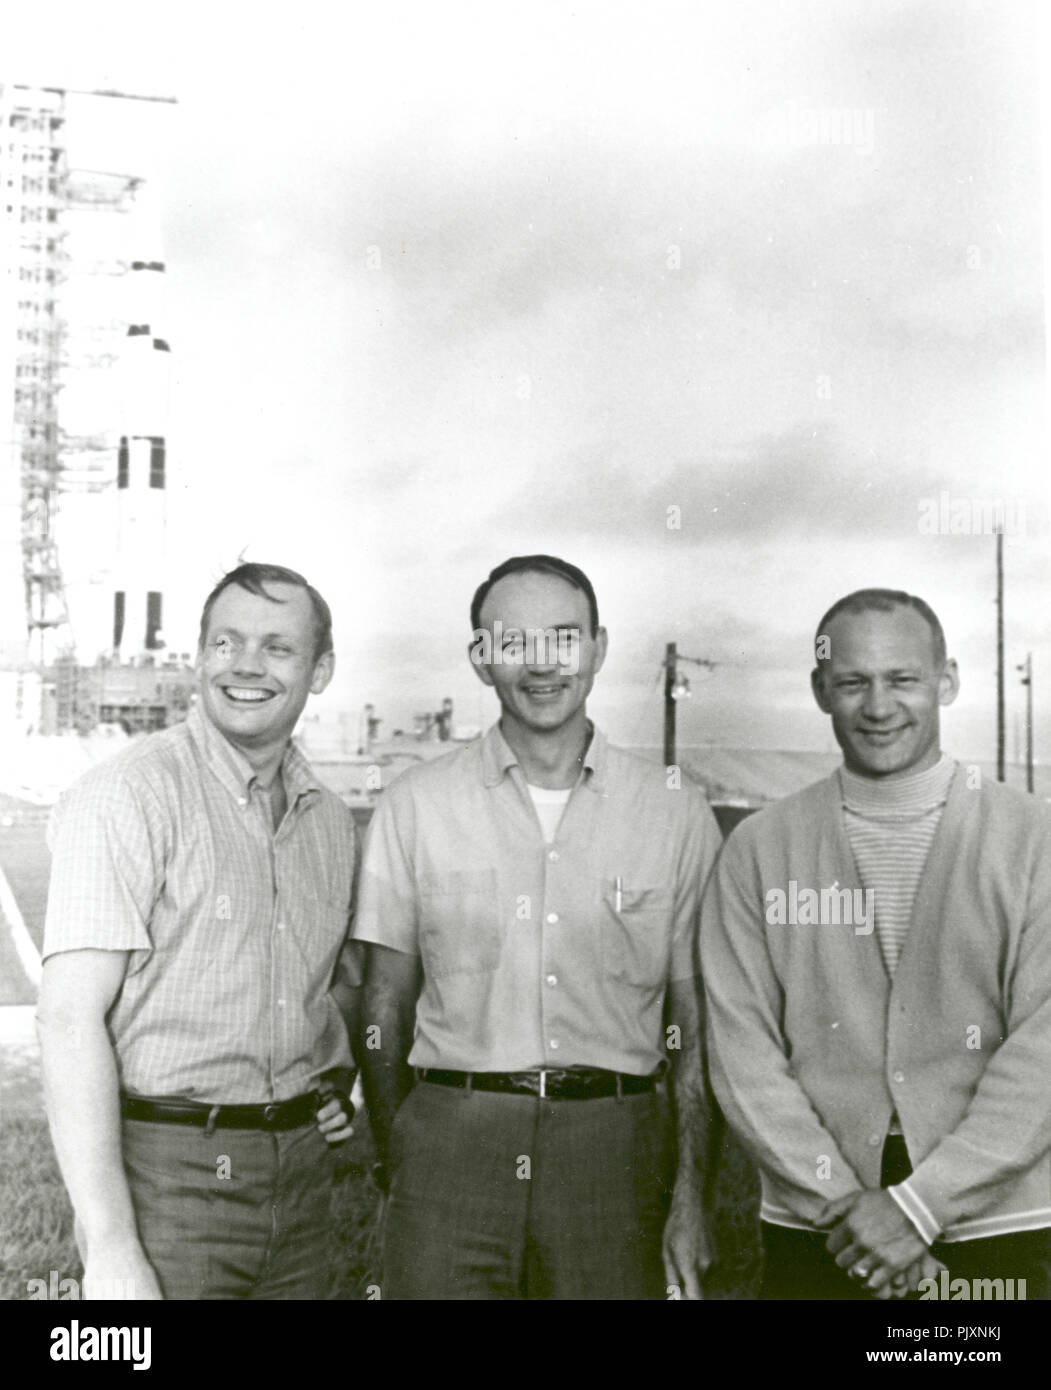 Cape Canaveral, FL - (FILE) -- On May 20, 1969, the National Aeronautics and Space Administration's (NASA) Apollo 11 flight crew, Neil A. Armstrong, commander, left; Michael Collins, command module pilot, center; and Buzz Aldrin, lunar module pilot, right, stand near the Apollo/Saturn V space vehicle that would eventually carry them into space on July 16,1969. Credit: NASA via CNP /MediaPunch Stock Photo